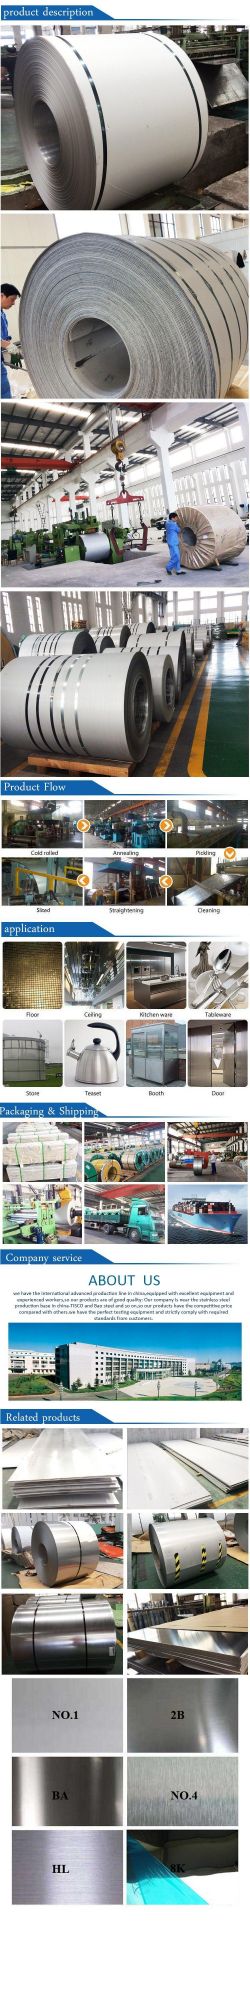 Hot Sale High Quality ASTM A240 304 316 Stainless Steel Coil From China Supplier 301 201 2b/Mirror/No. 1/Hl Stainless Steel Coil